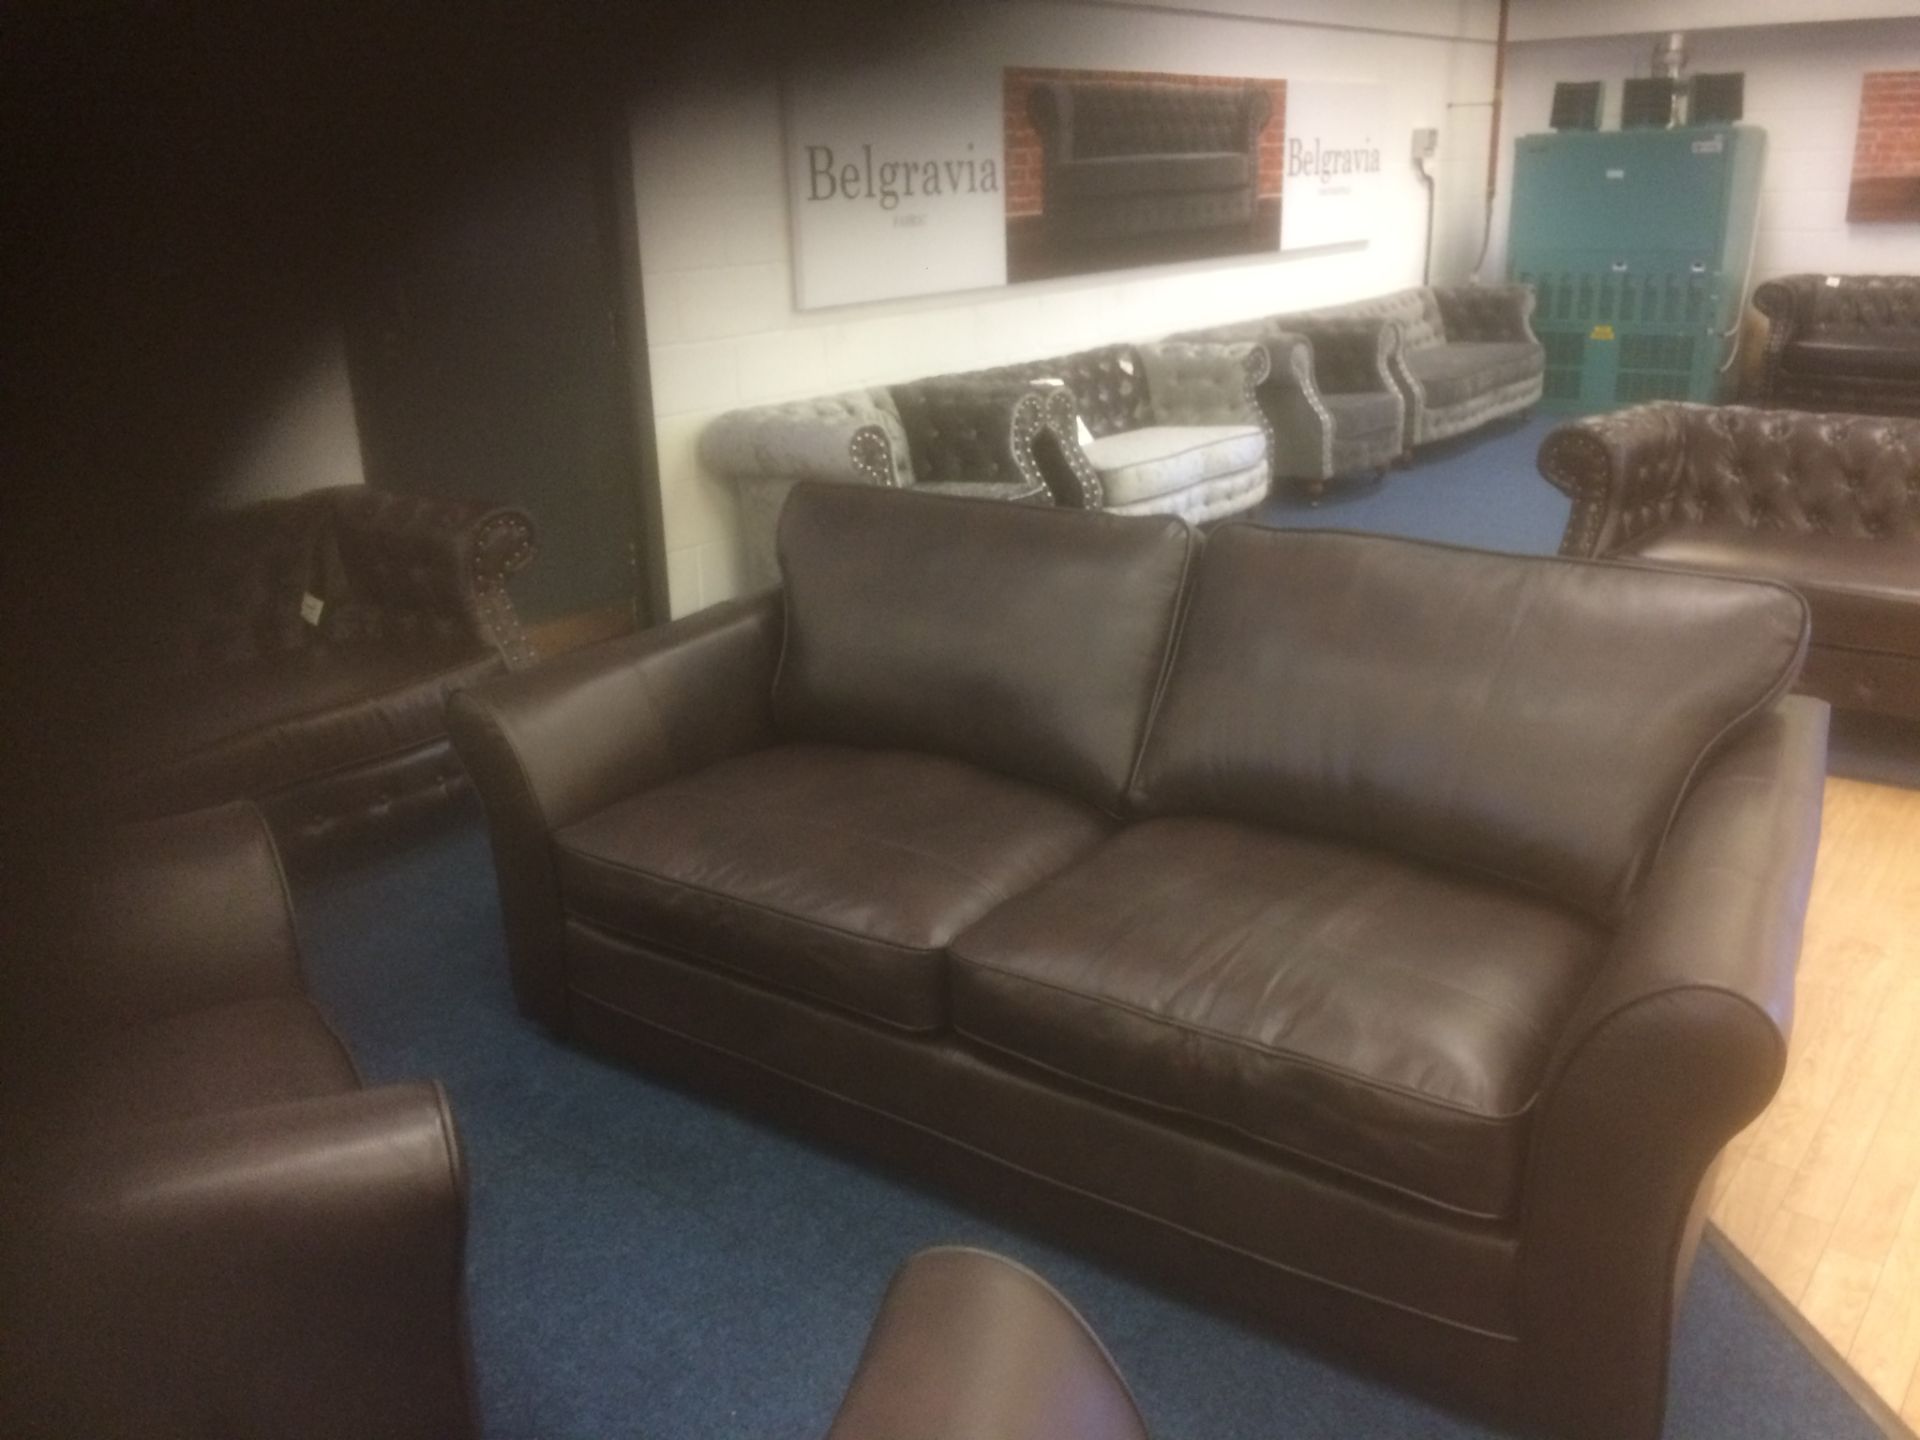 Ripley 3 seater sofa plus 2 seater sofa in rich brown leather plus matching footstool - Image 2 of 2